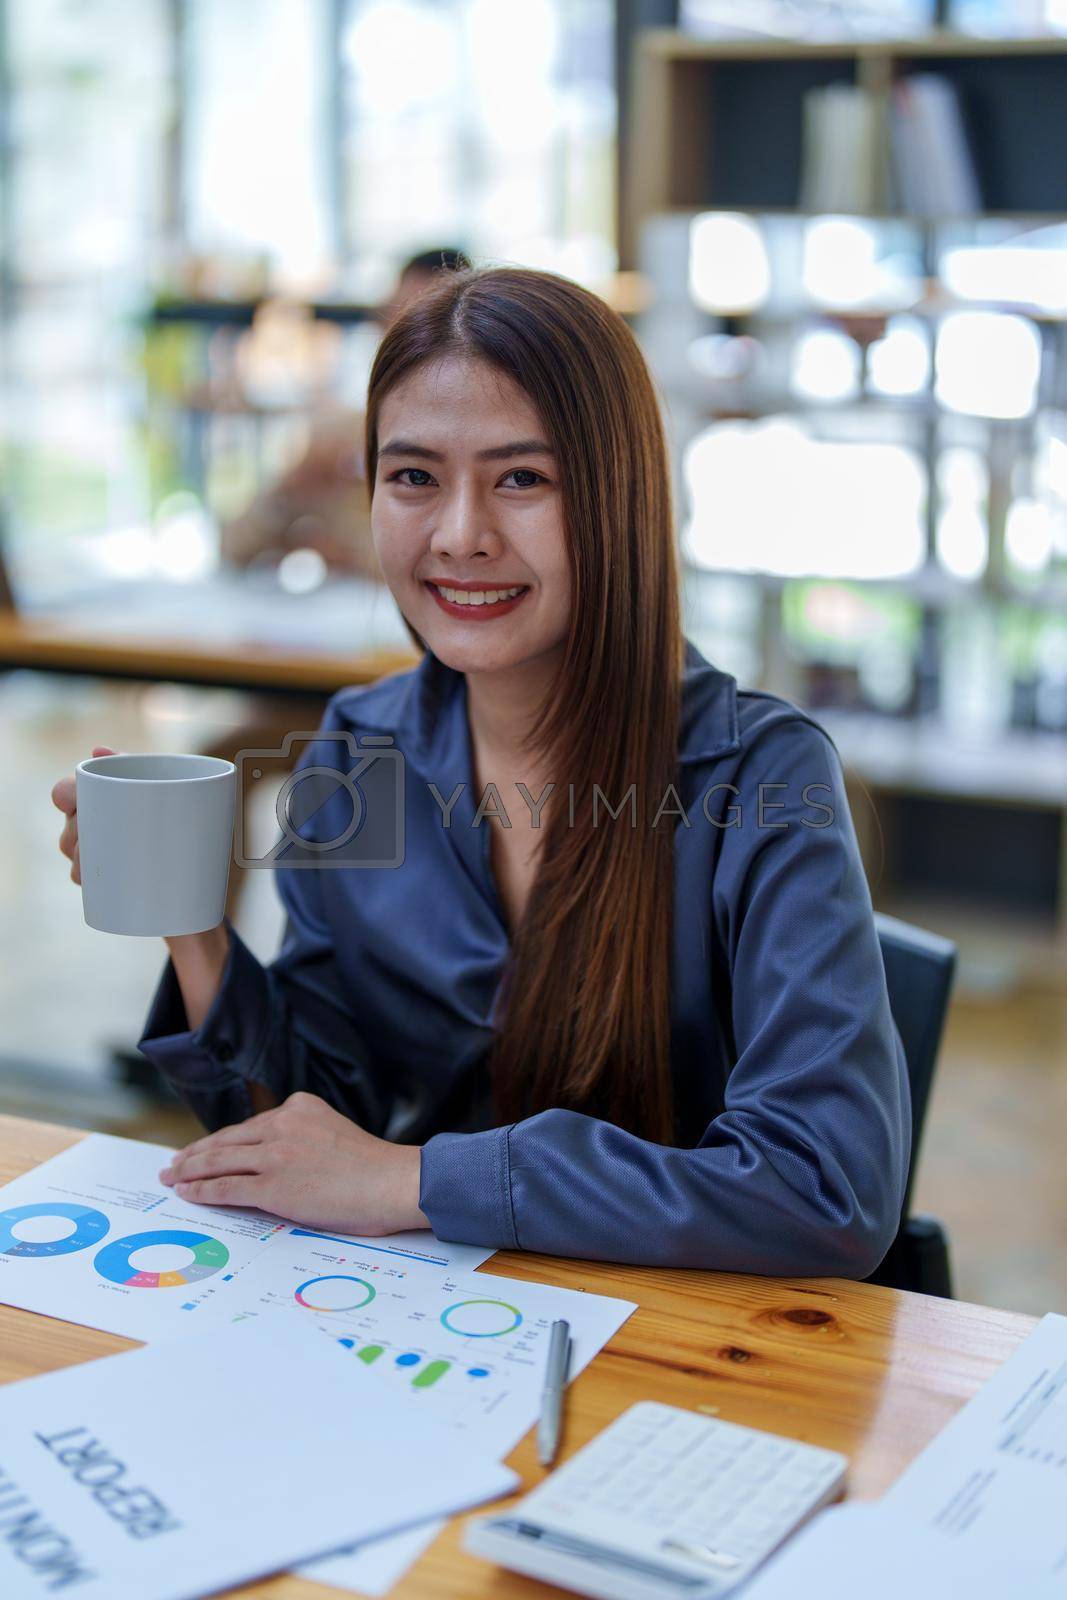 Royalty free image of Portrait of a happy Asian woman smiling at her desk during the daytime coffee break by Manastrong